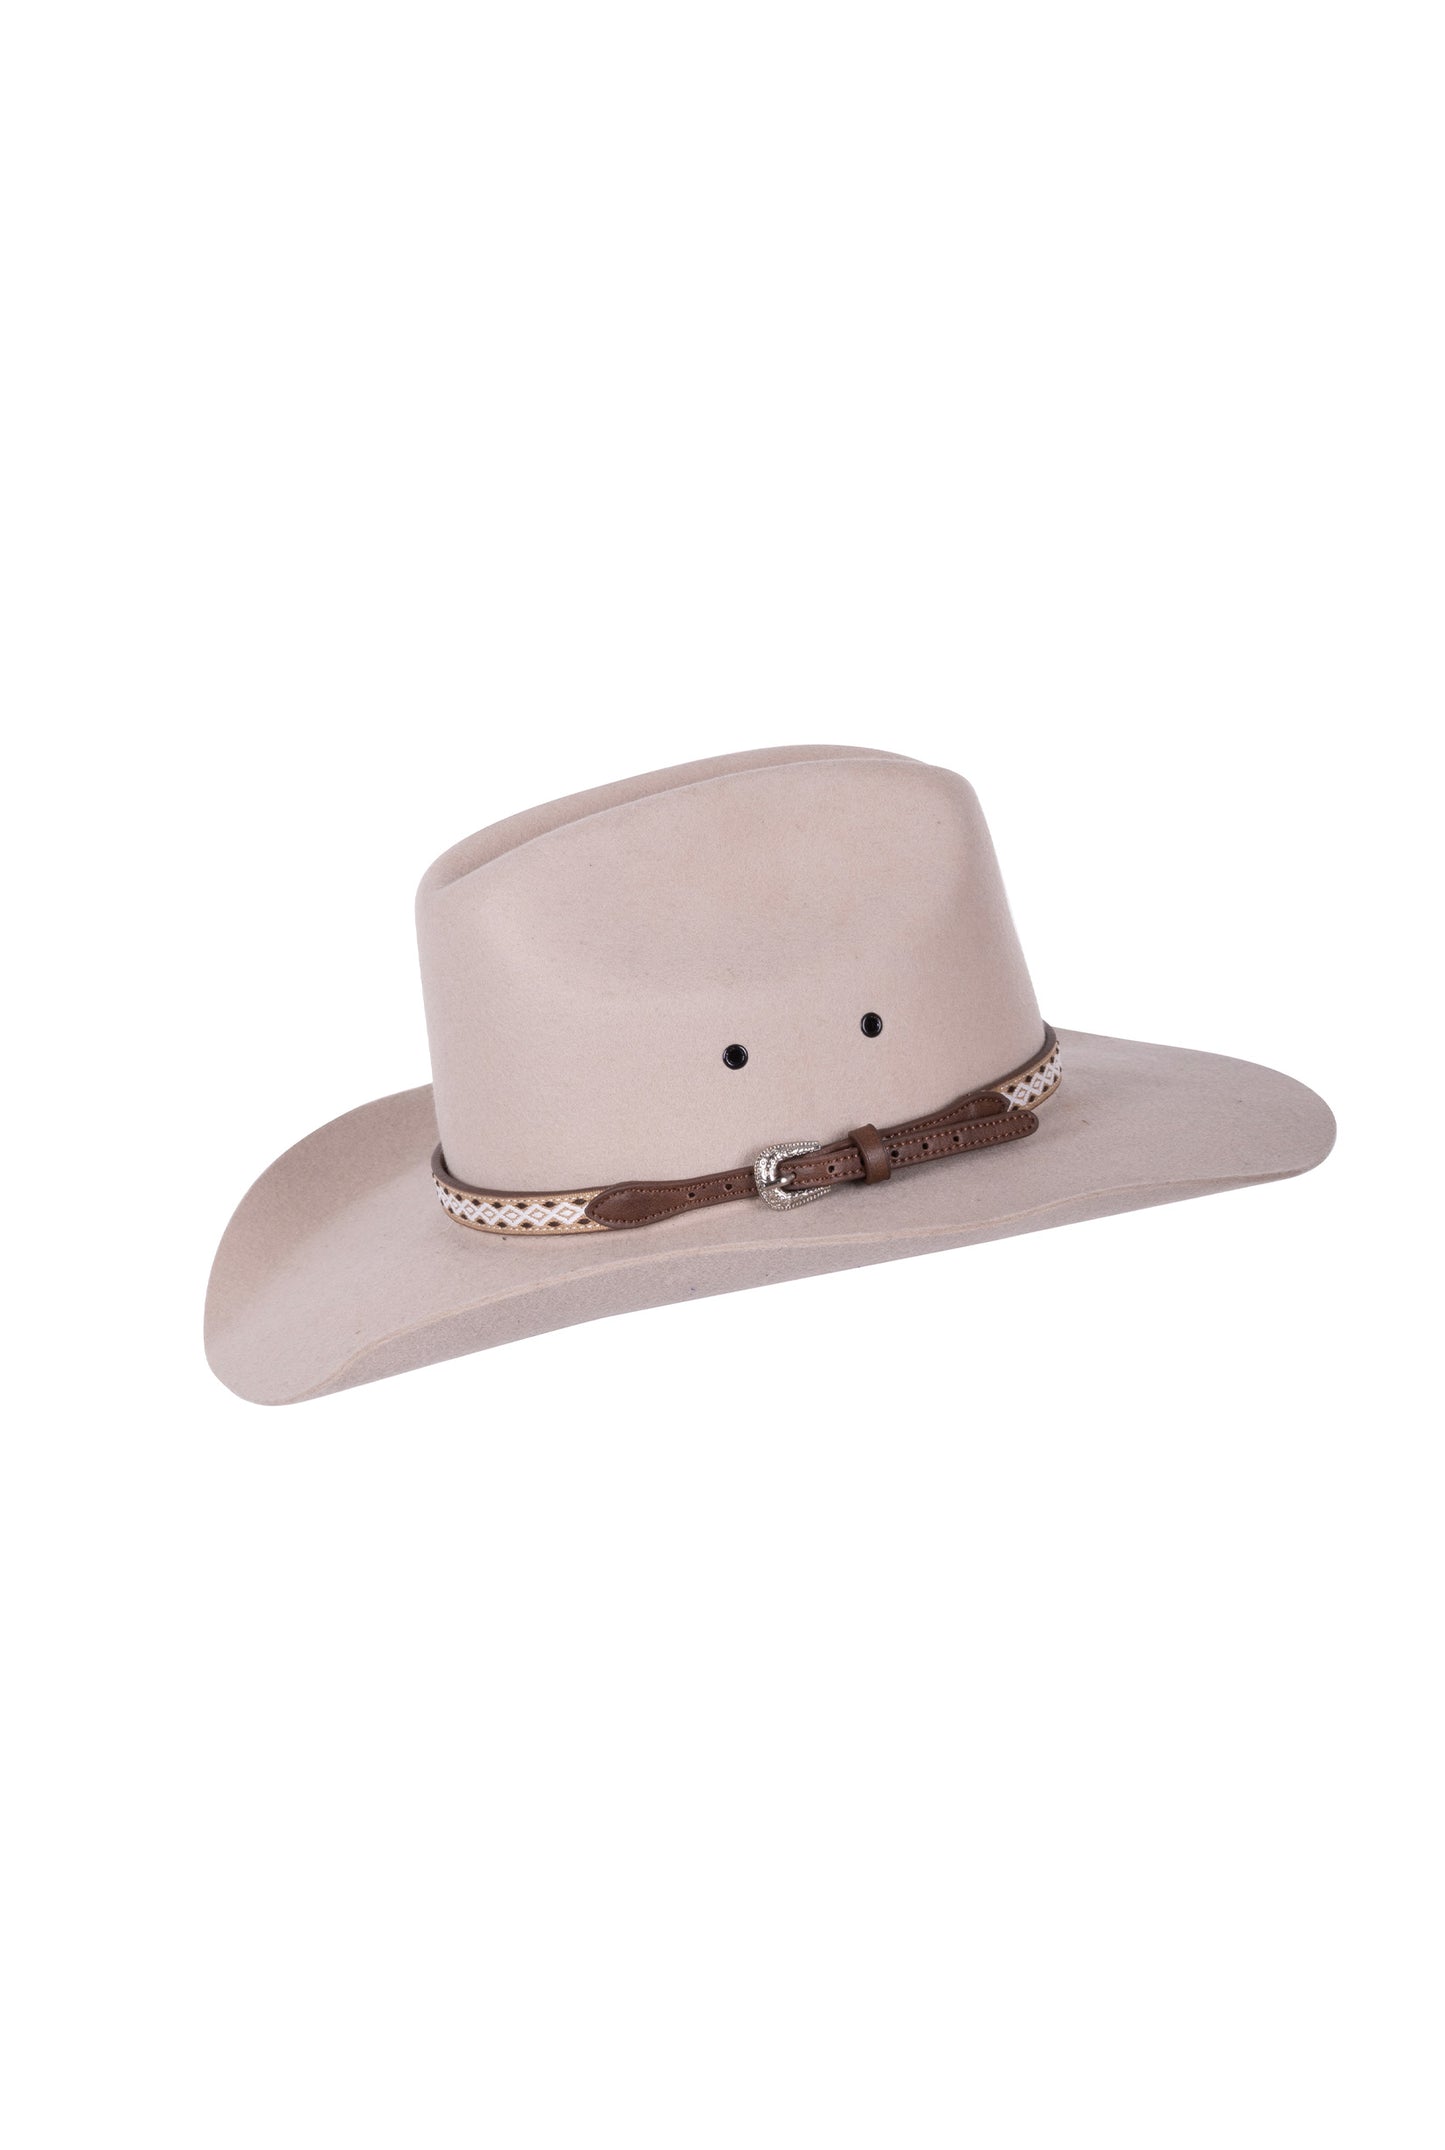 Pure Western Drew Hat Band - Tan/Natural - P3S2994BND